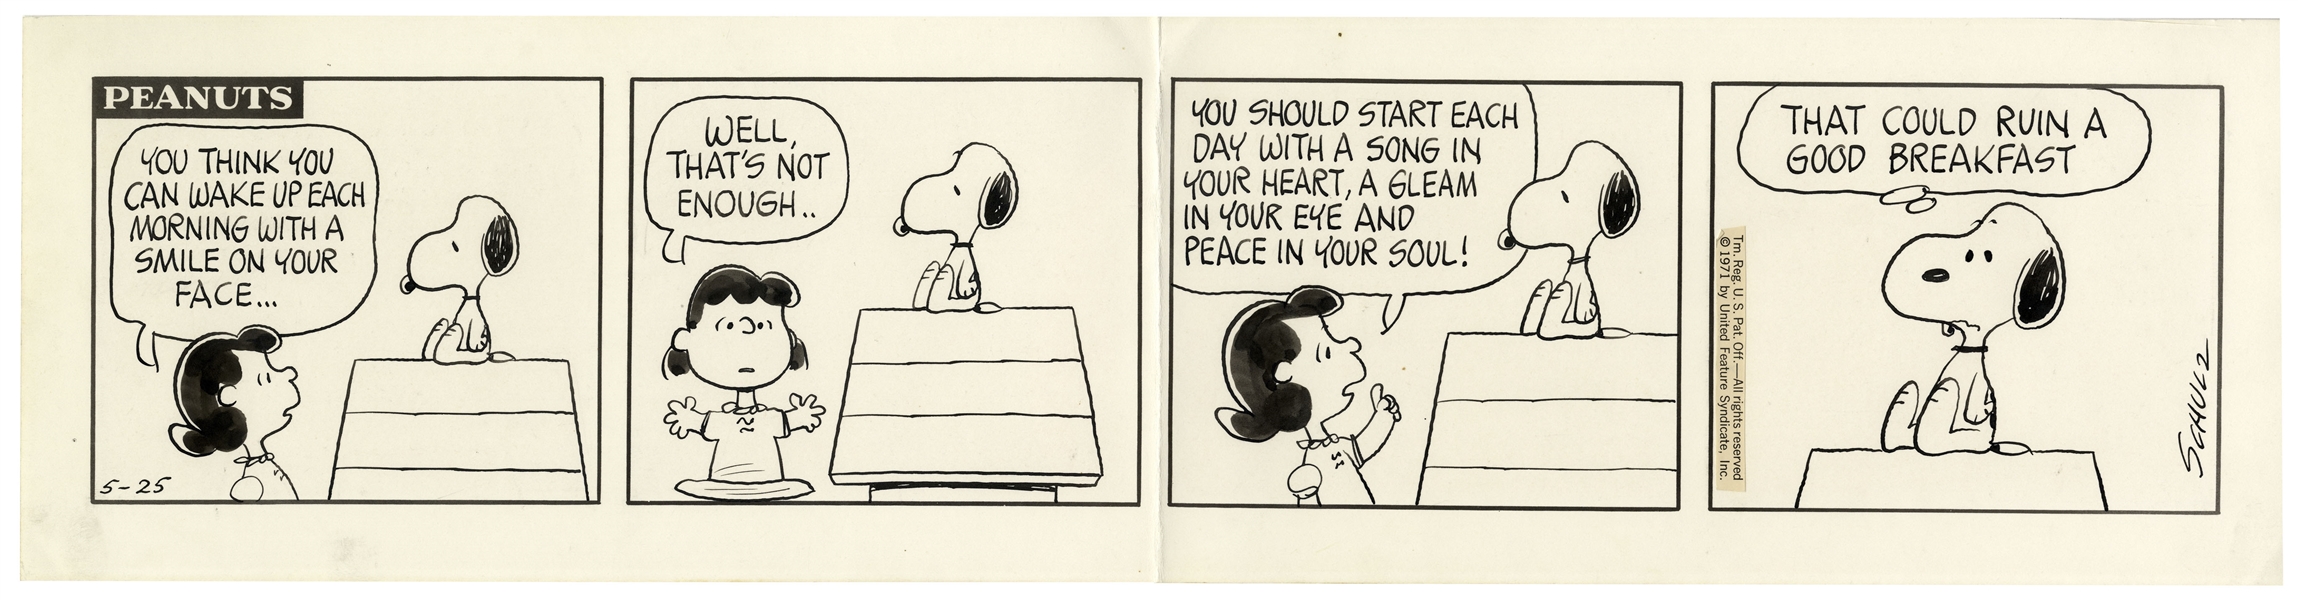 Charles Schulz Hand-Drawn ''Peanuts'' Comic Strip From 1971 Featuring Snoopy & Lucy